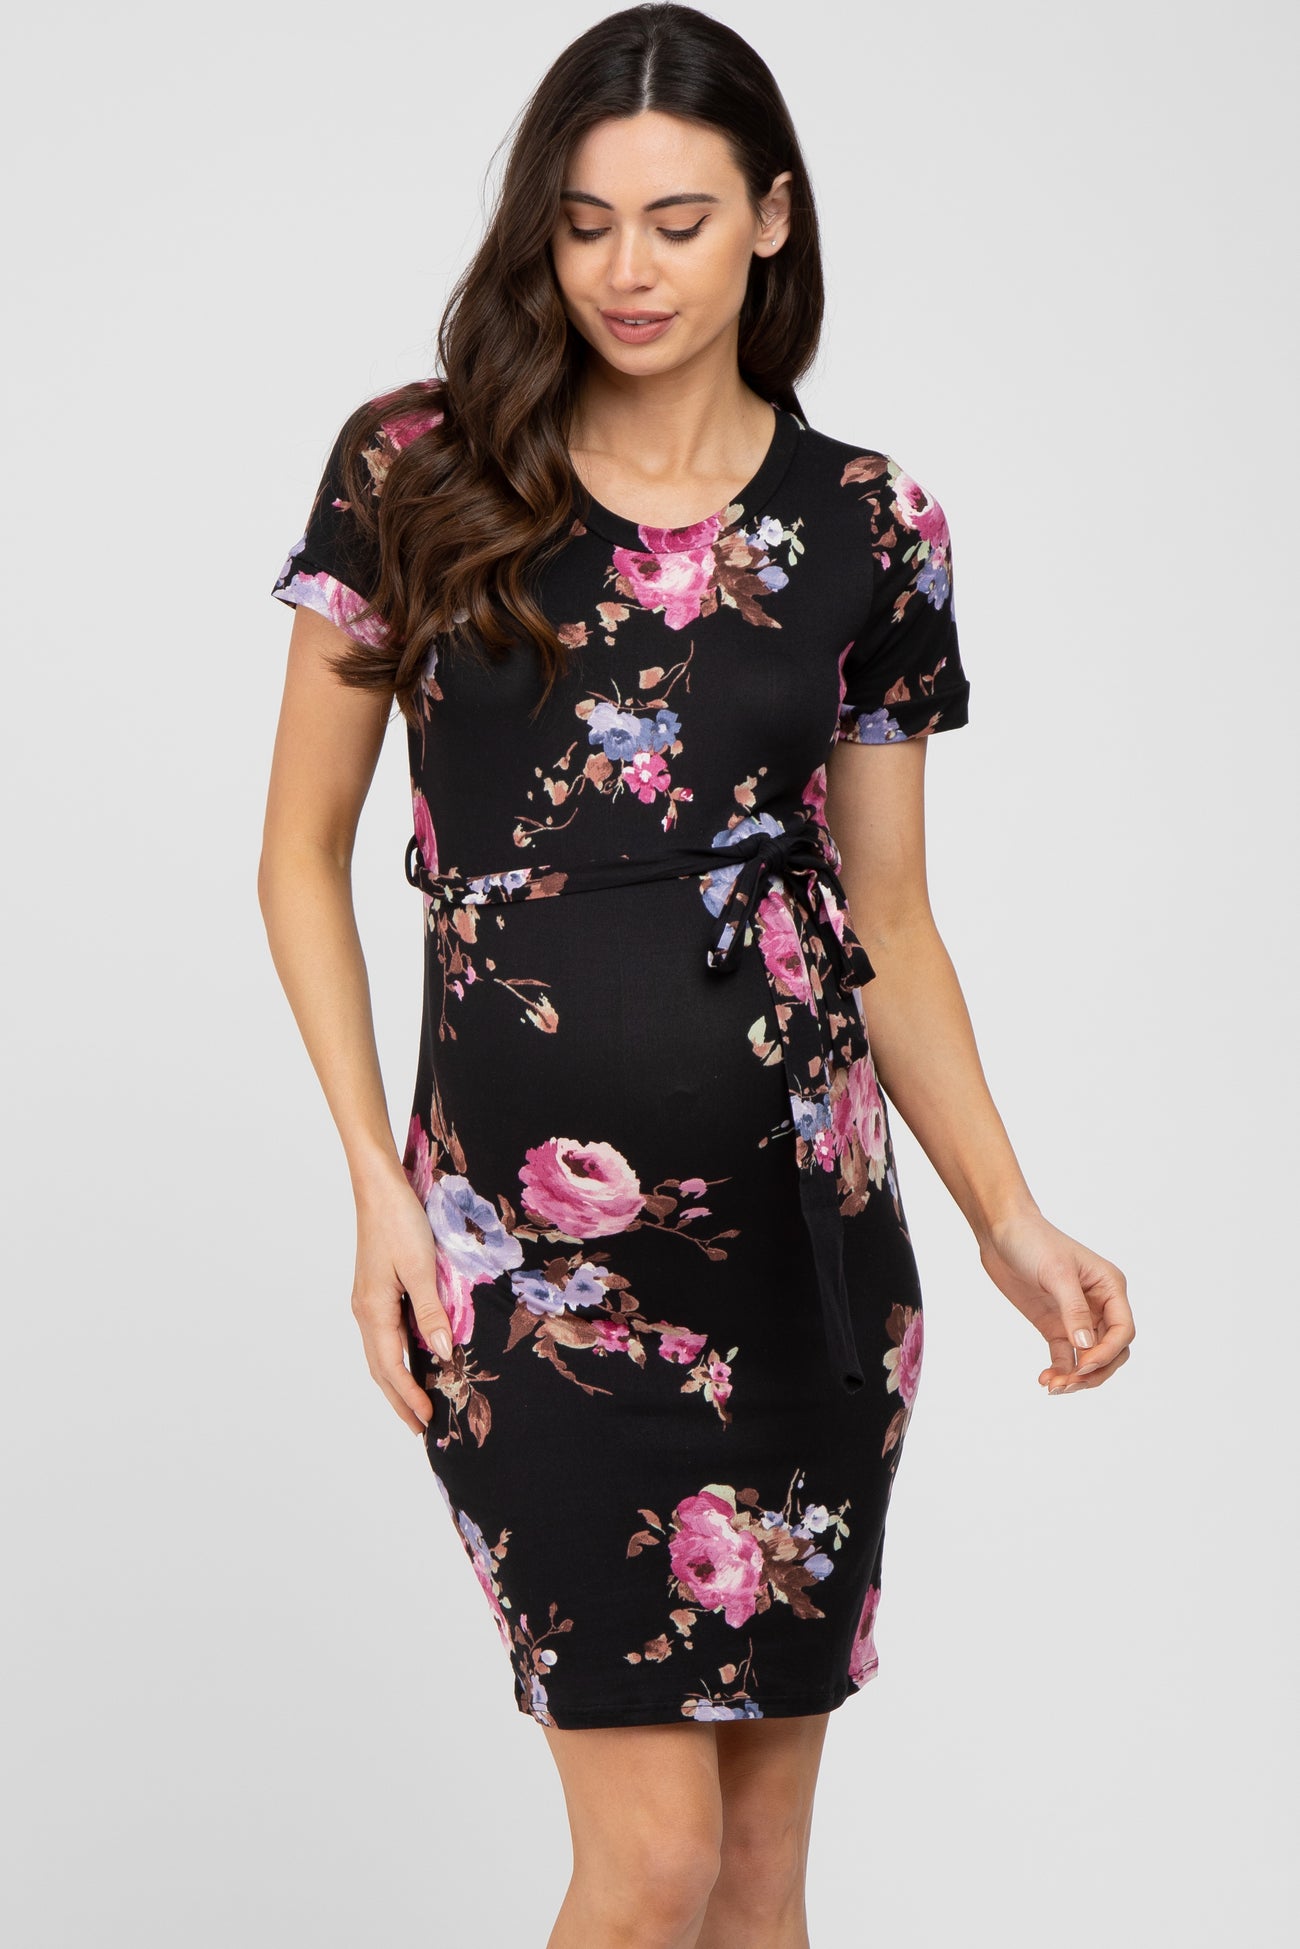 Black Floral Sash Tie Maternity Fitted Dress– PinkBlush